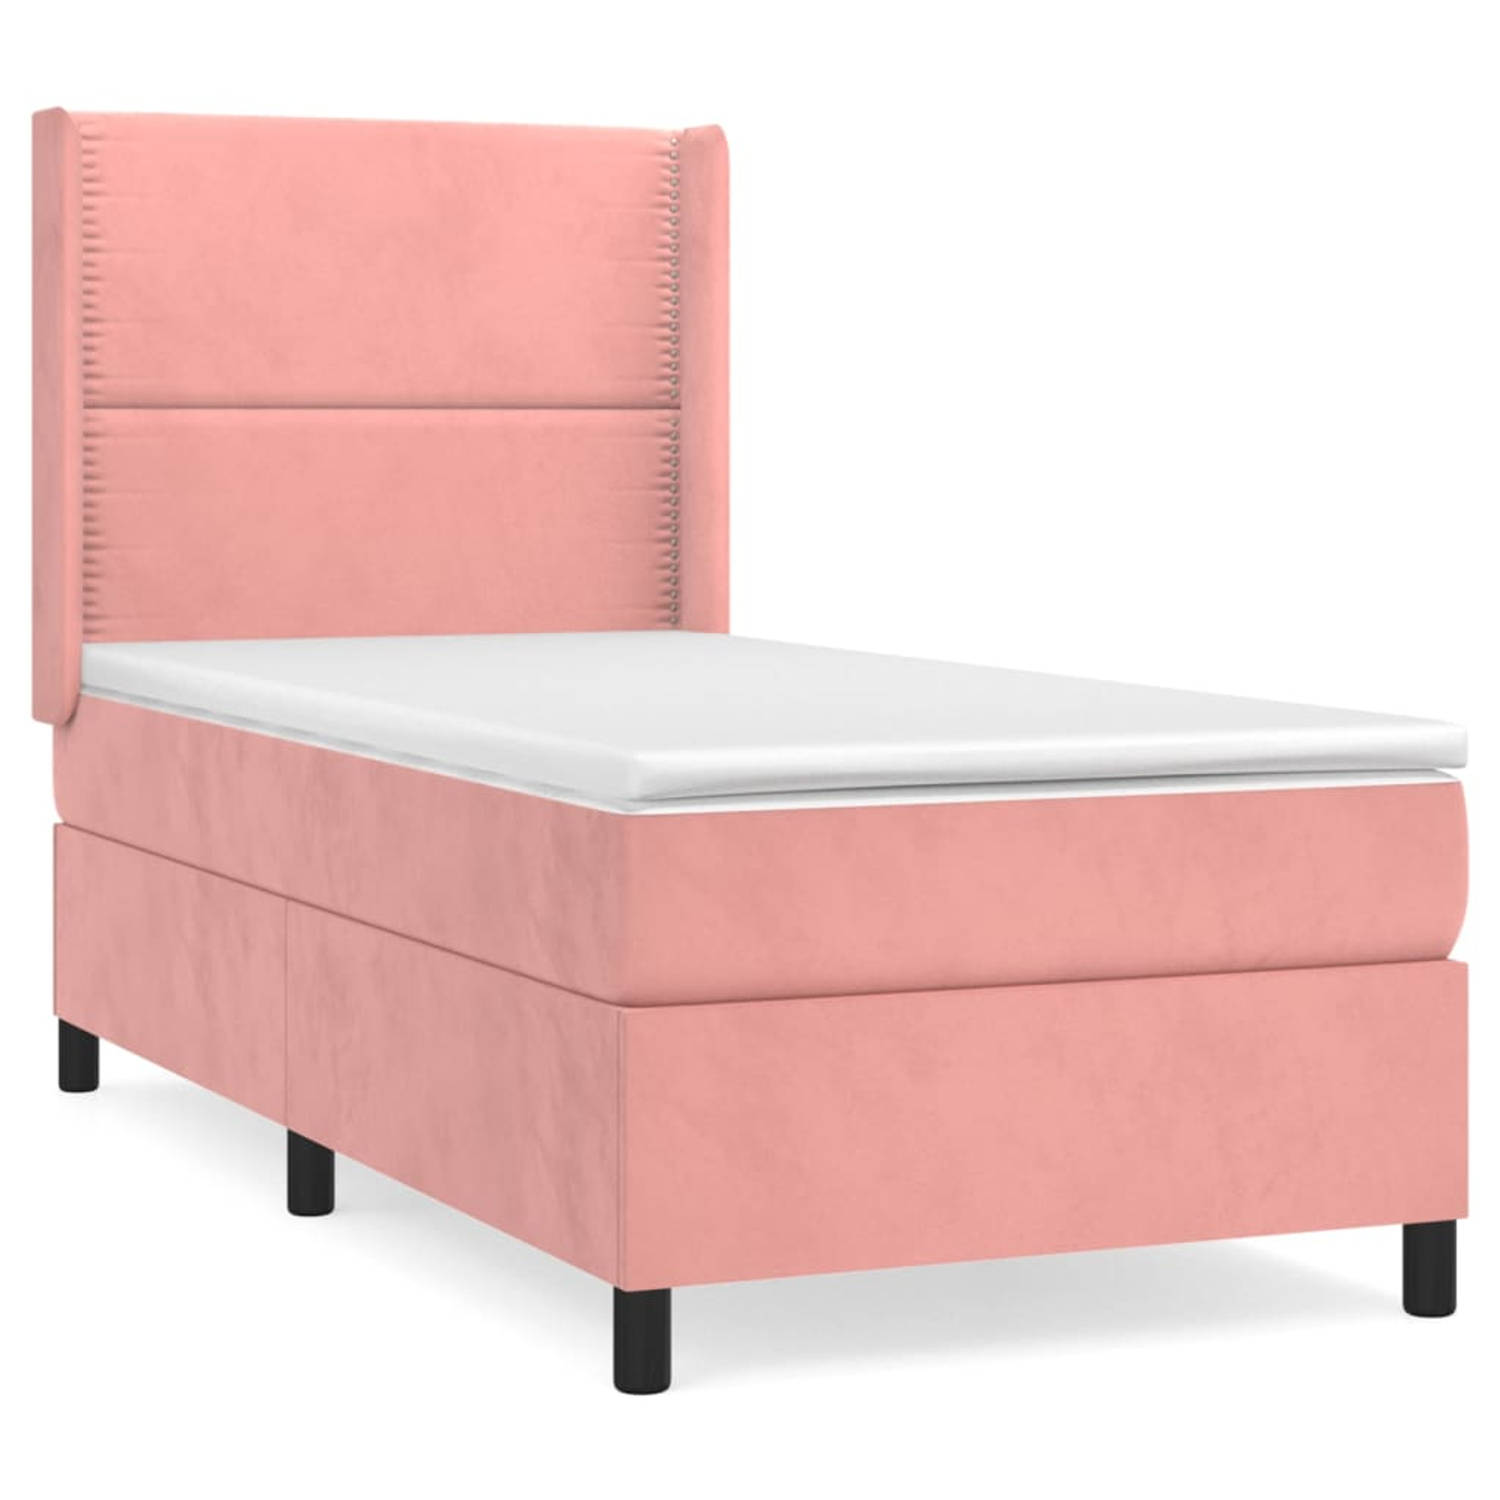 The Living Store Boxspringbed - Comfort - Bed - 203x103x118/128cm - Kleur- roze